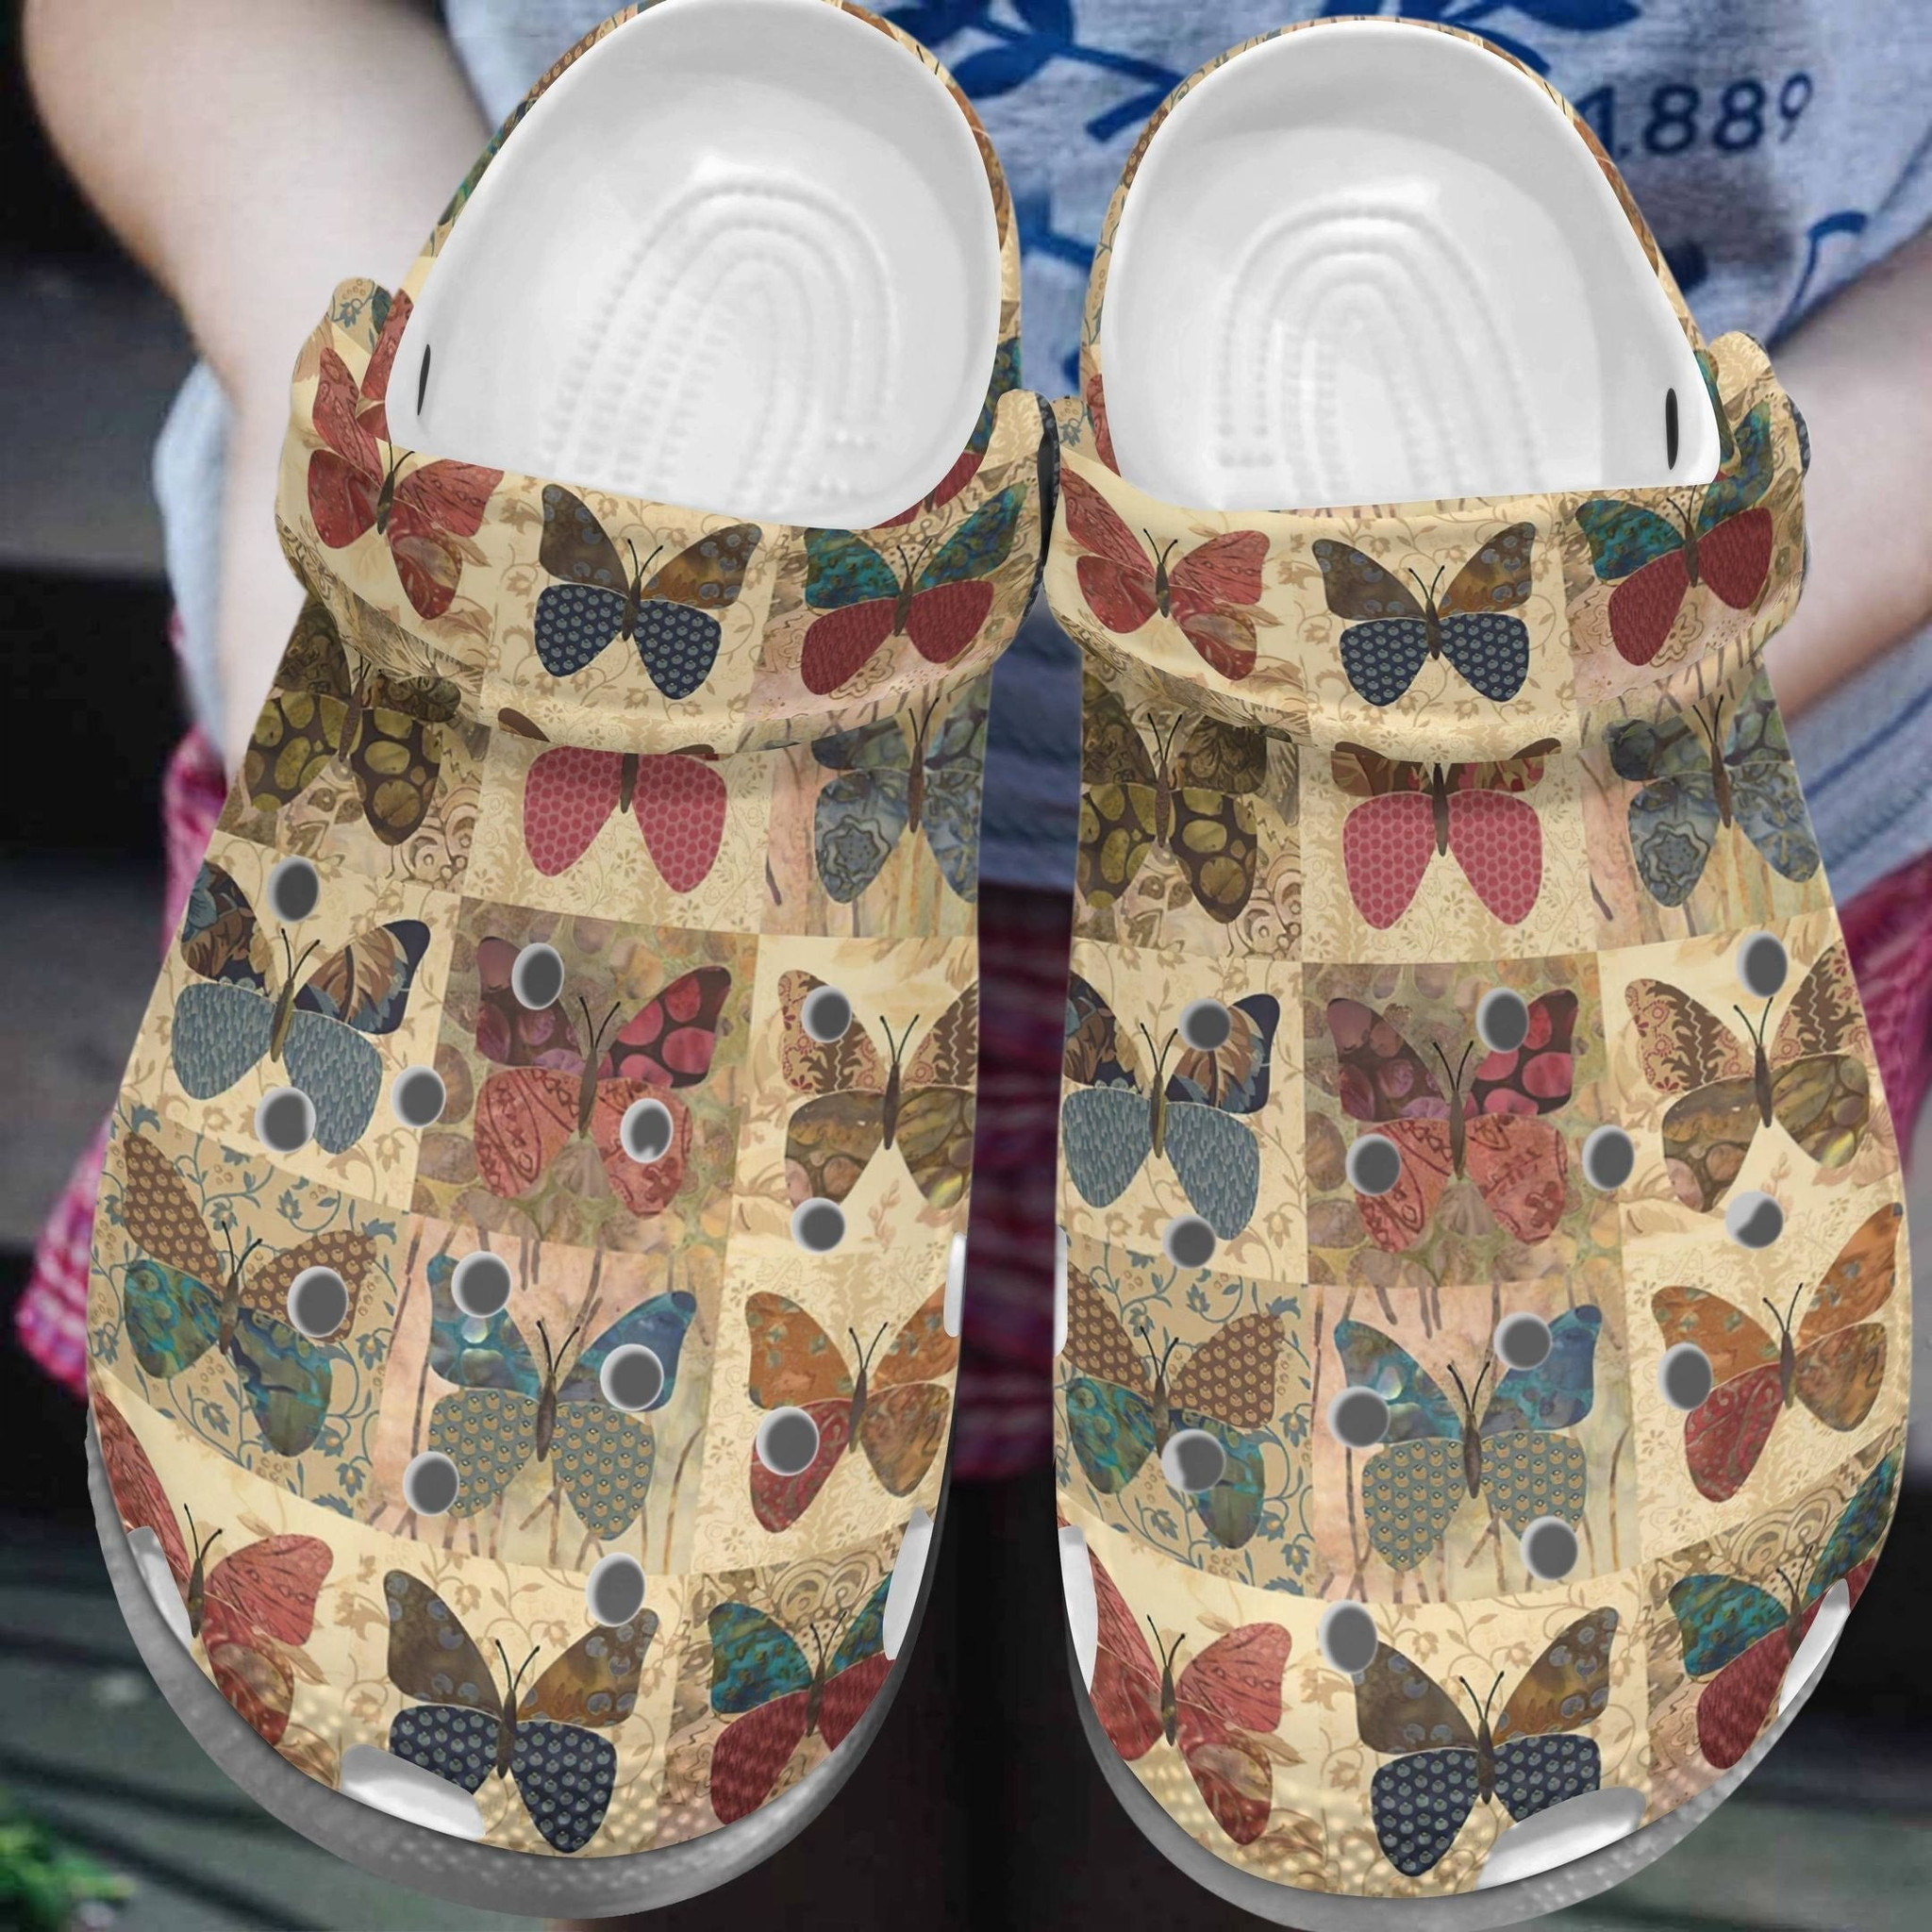 Butterfly Collection Croc Crocs Shoes - Butterflies Clog Gifts For Mother Day Grandma